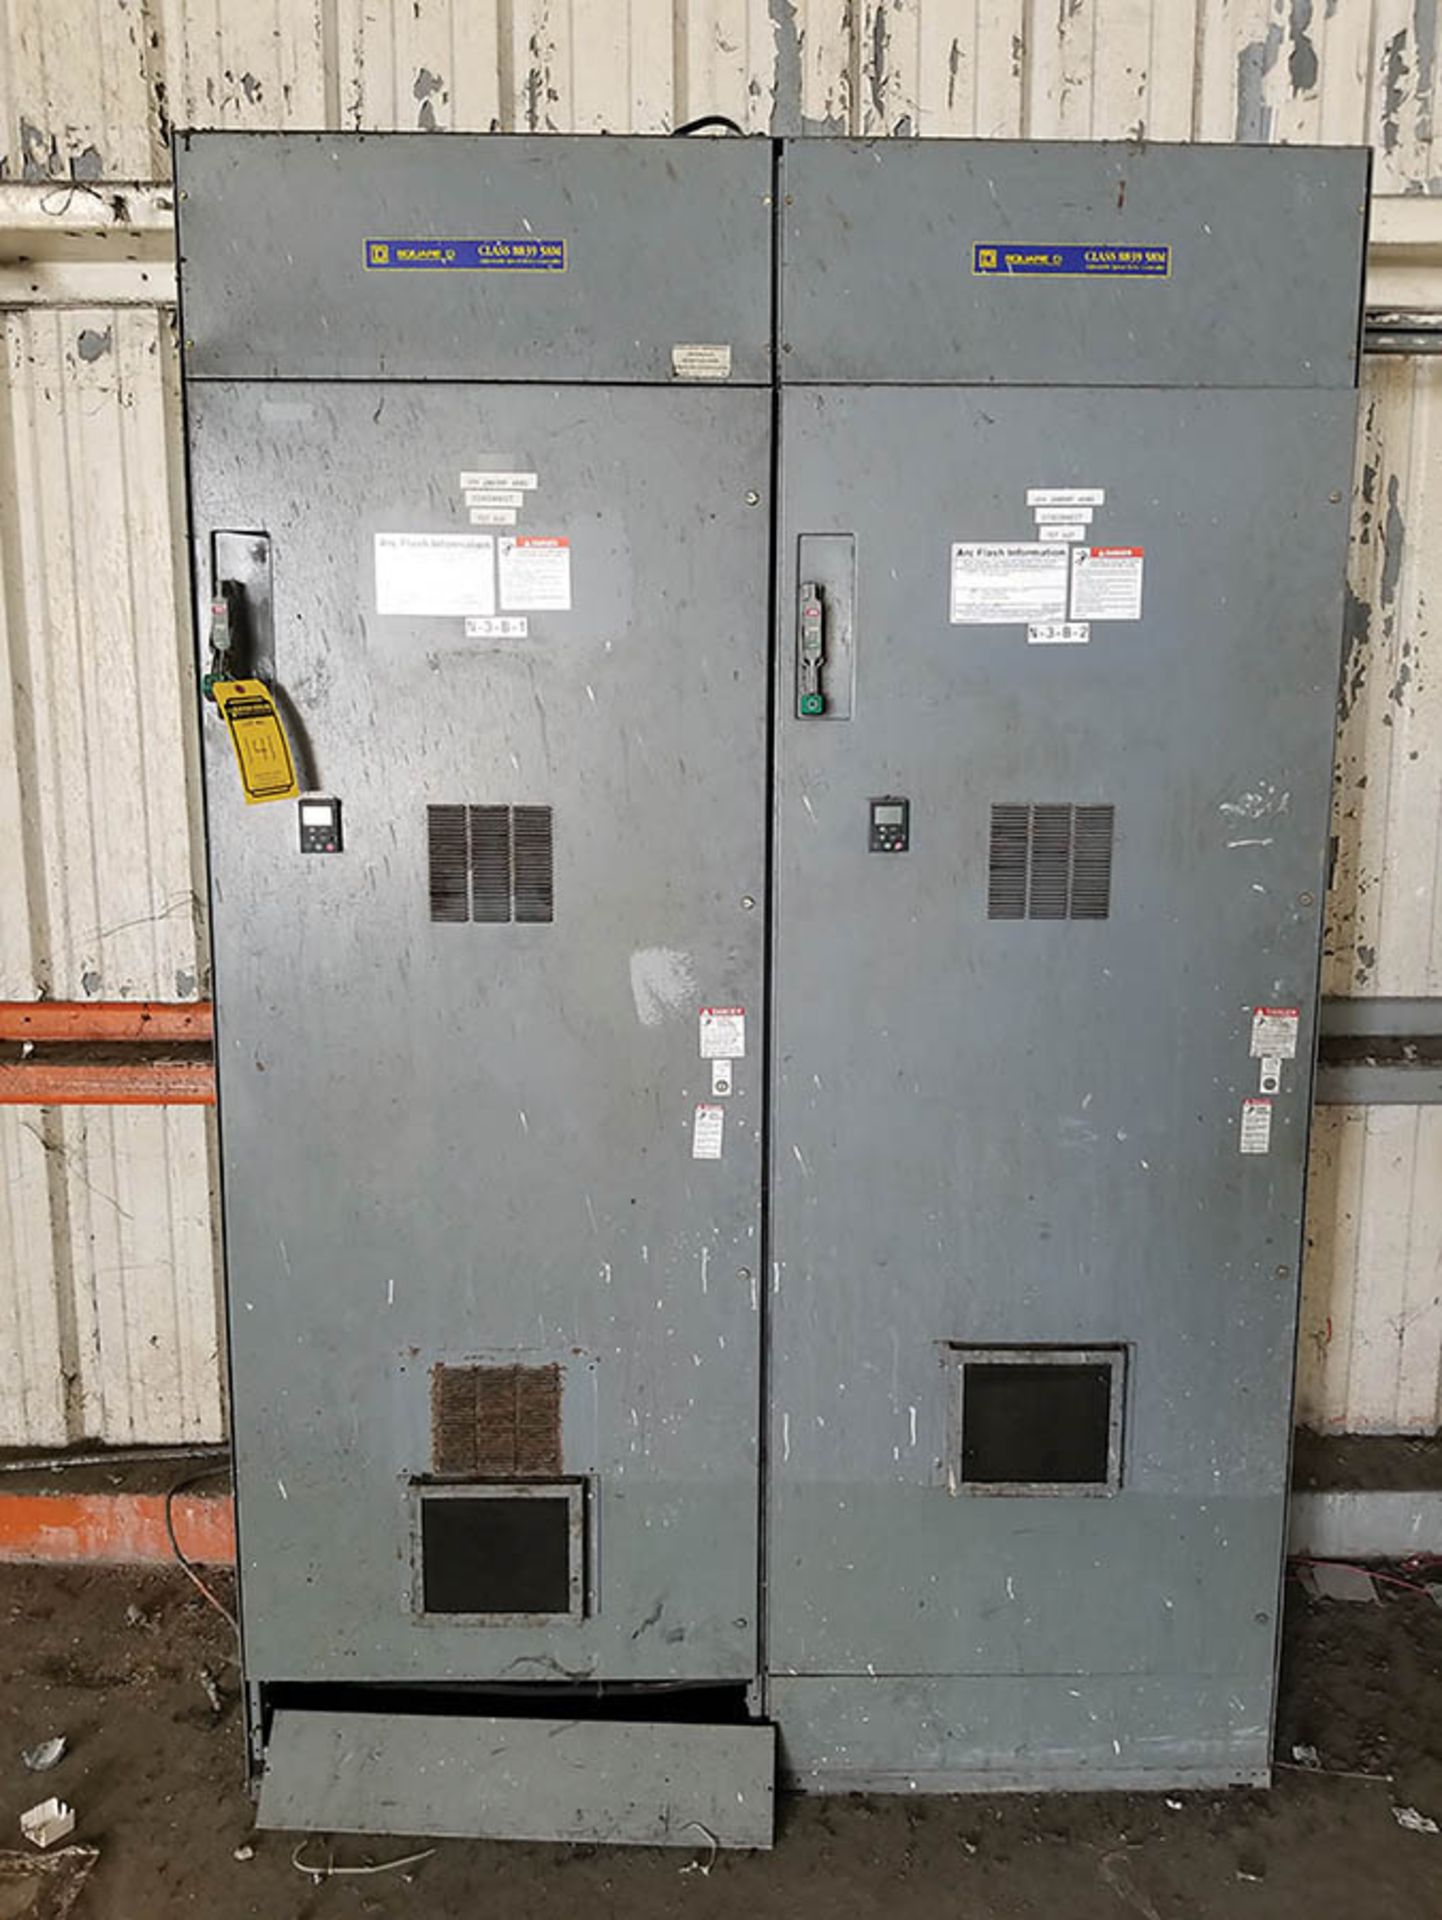 ALL ELECTRICAL CONTROL PANELS USED TO RUN OVERHEAD CONVEYORS, MCC'S, PLC'S, VOLTAGE STABILIZERS, PLC - Image 9 of 13